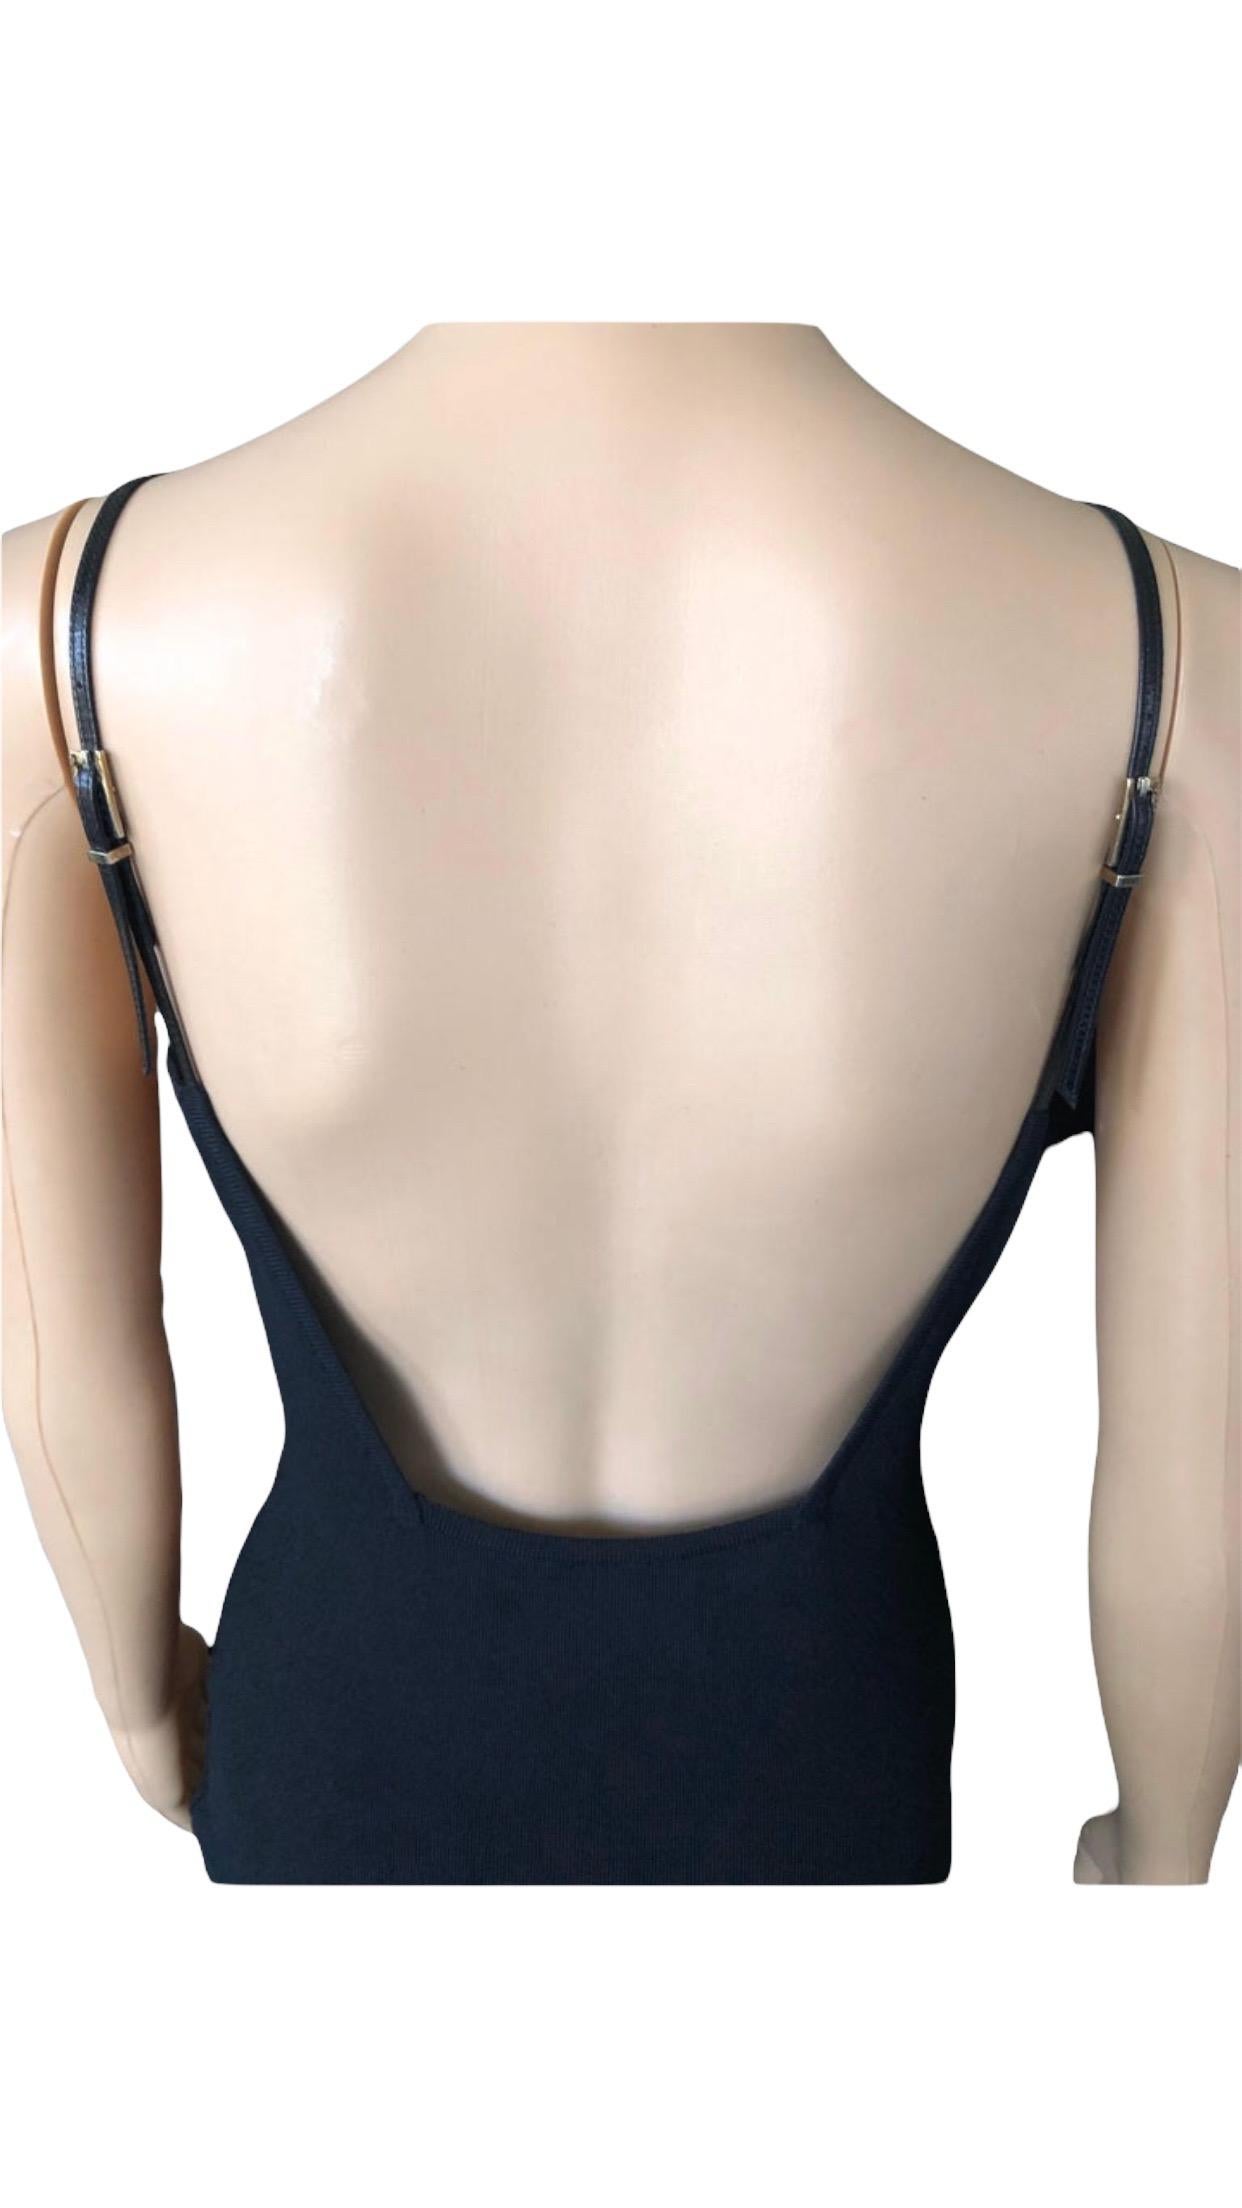 Tom Ford for Gucci S/S 1998 Bodycon Backless Buckle Straps Knit Black Midi Dress For Sale 6